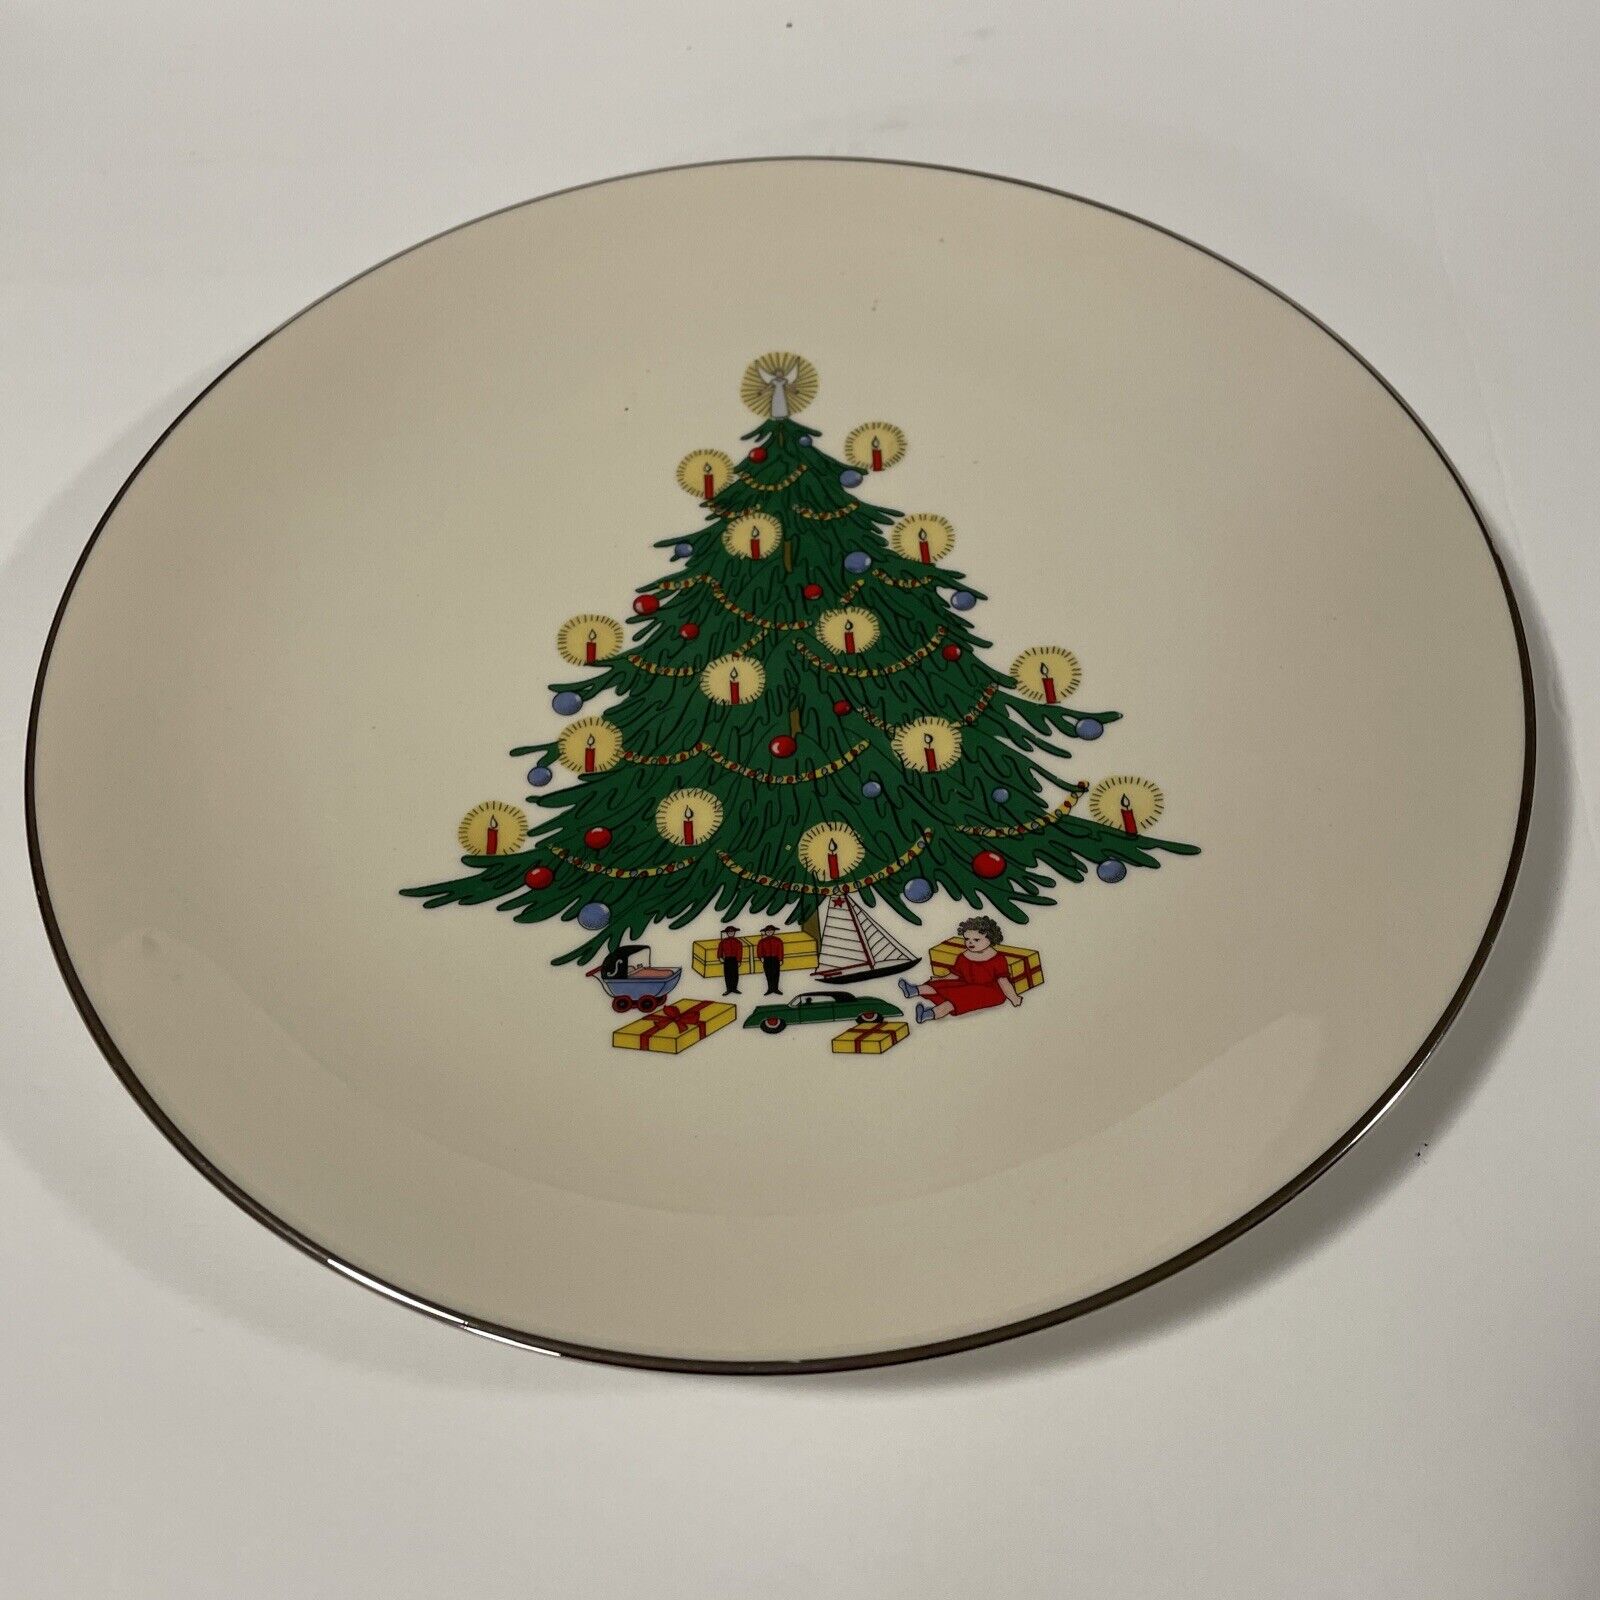 TRIOMPHE 8” Christmas Plate With Gold Trim.  Rare Plate In Very Good Condition.